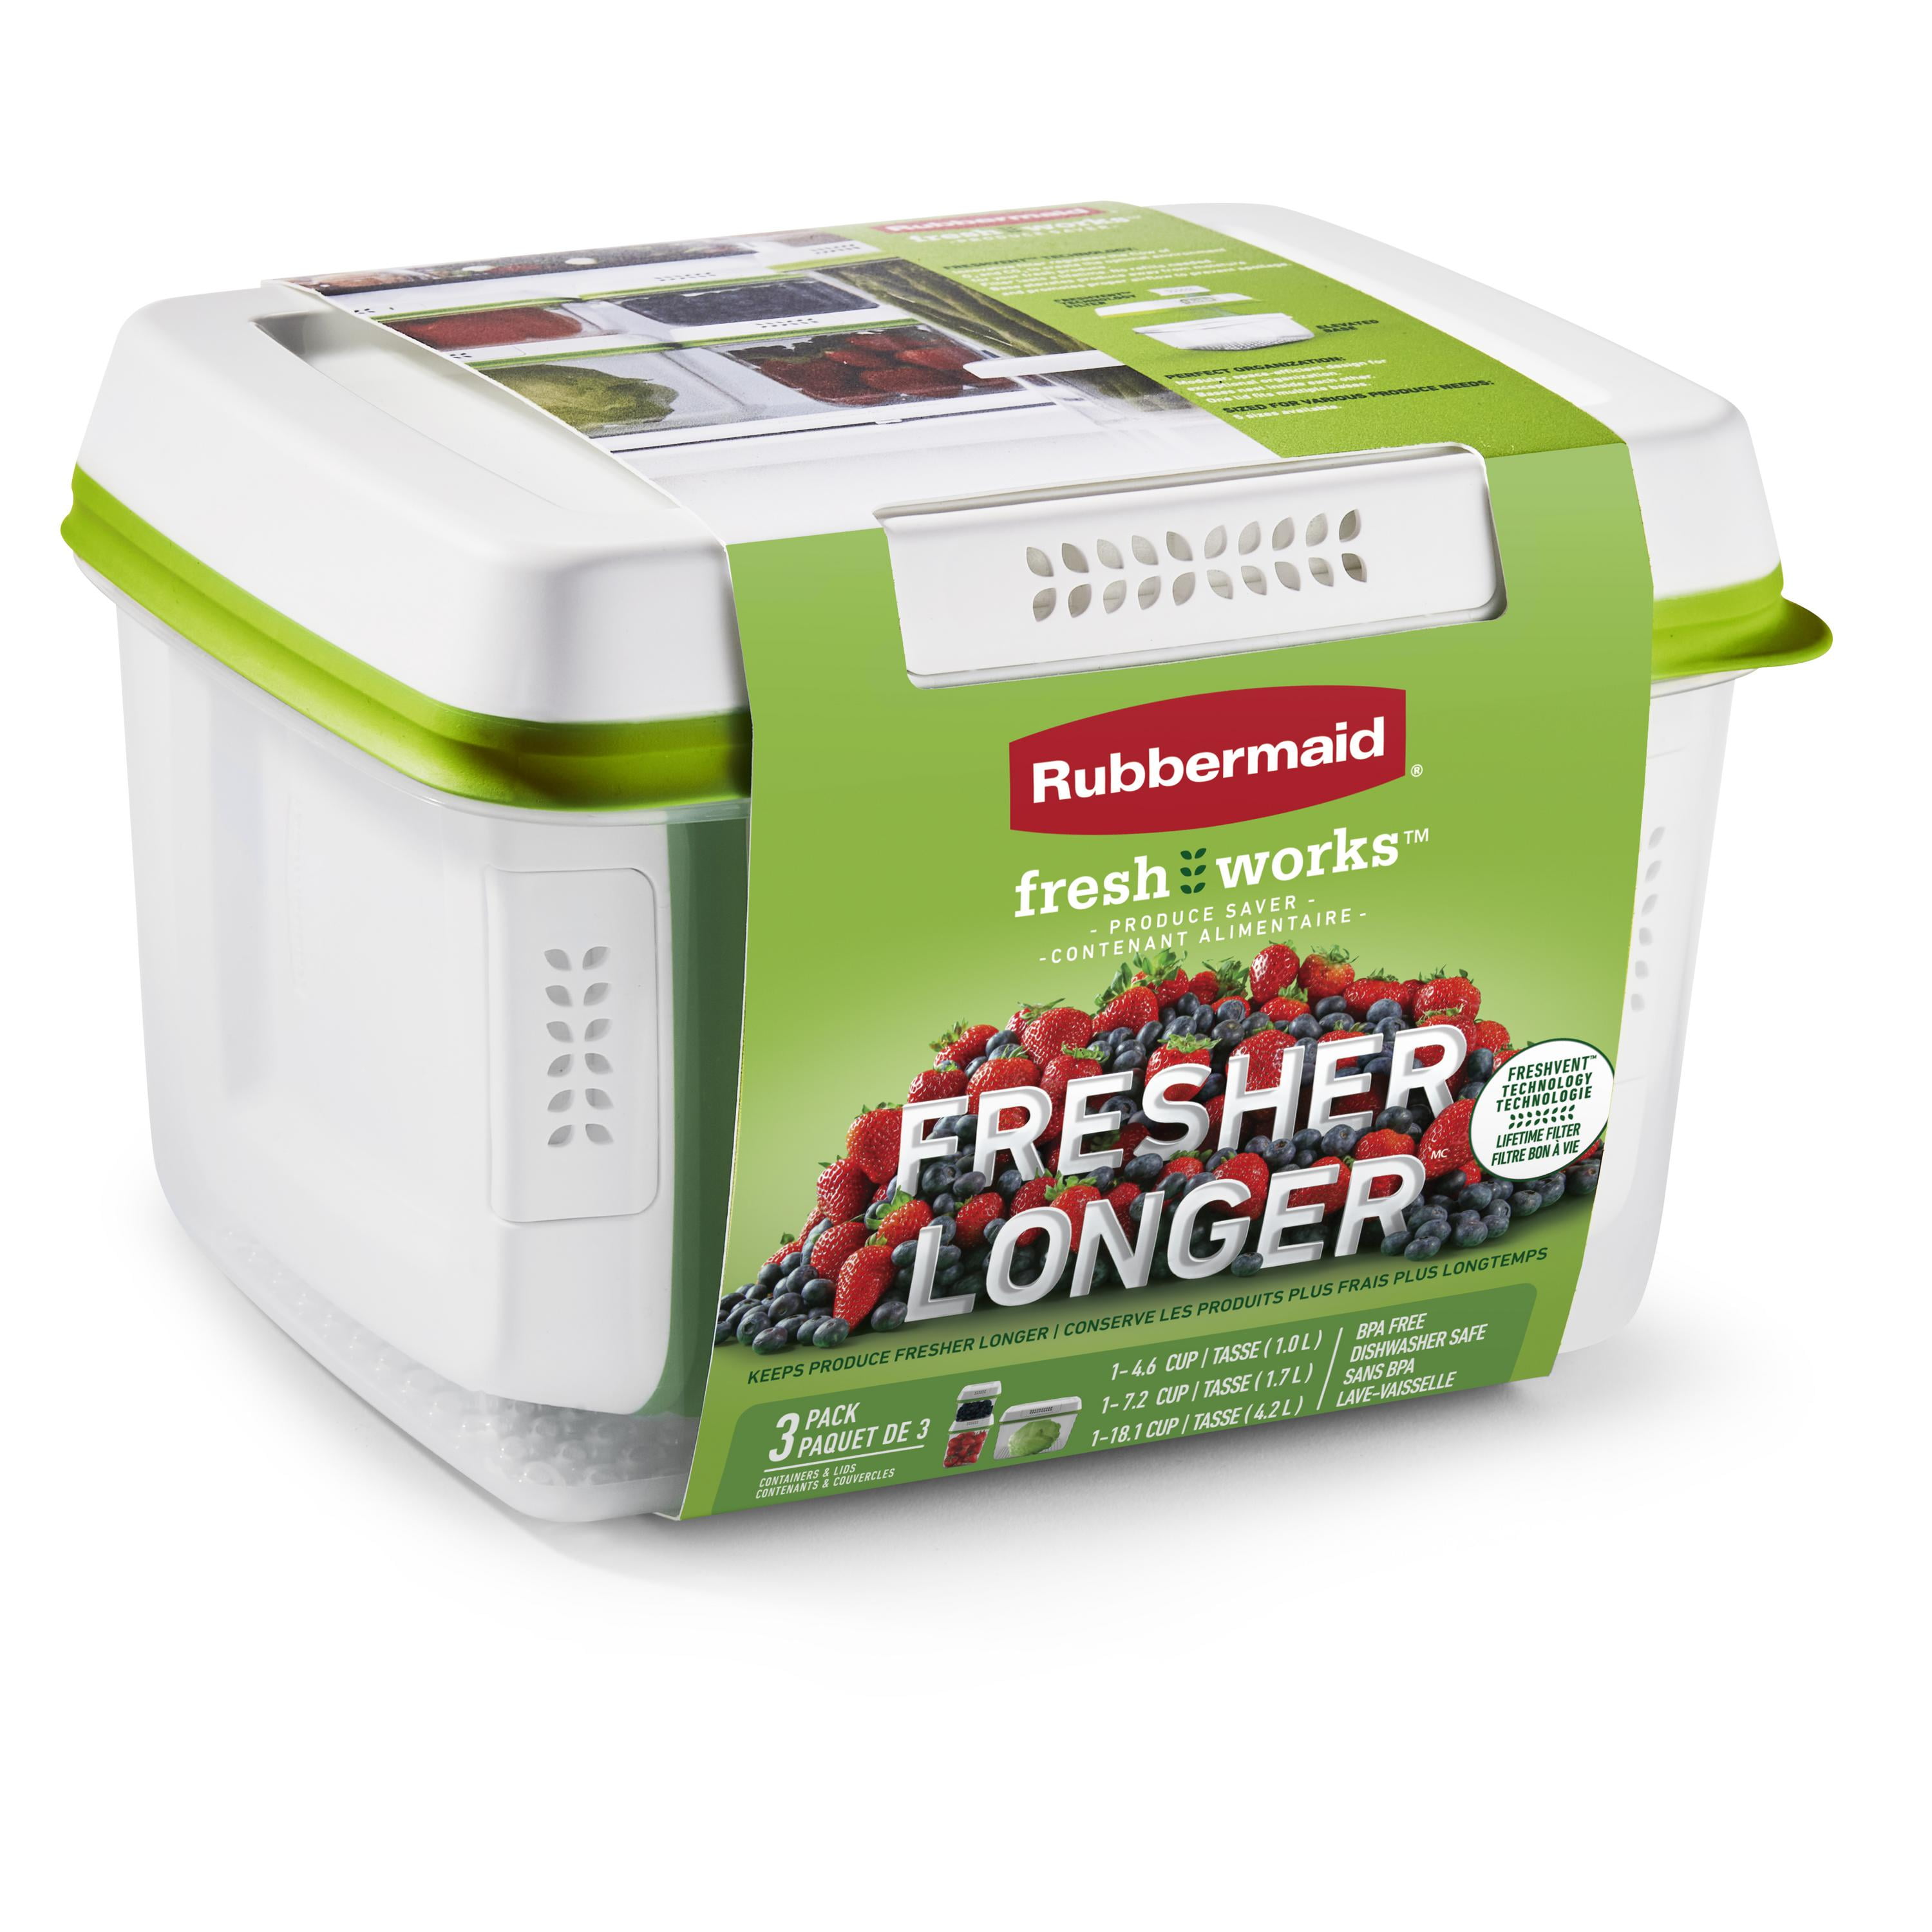  Rubbermaid 3-Piece Produce Saver Containers for